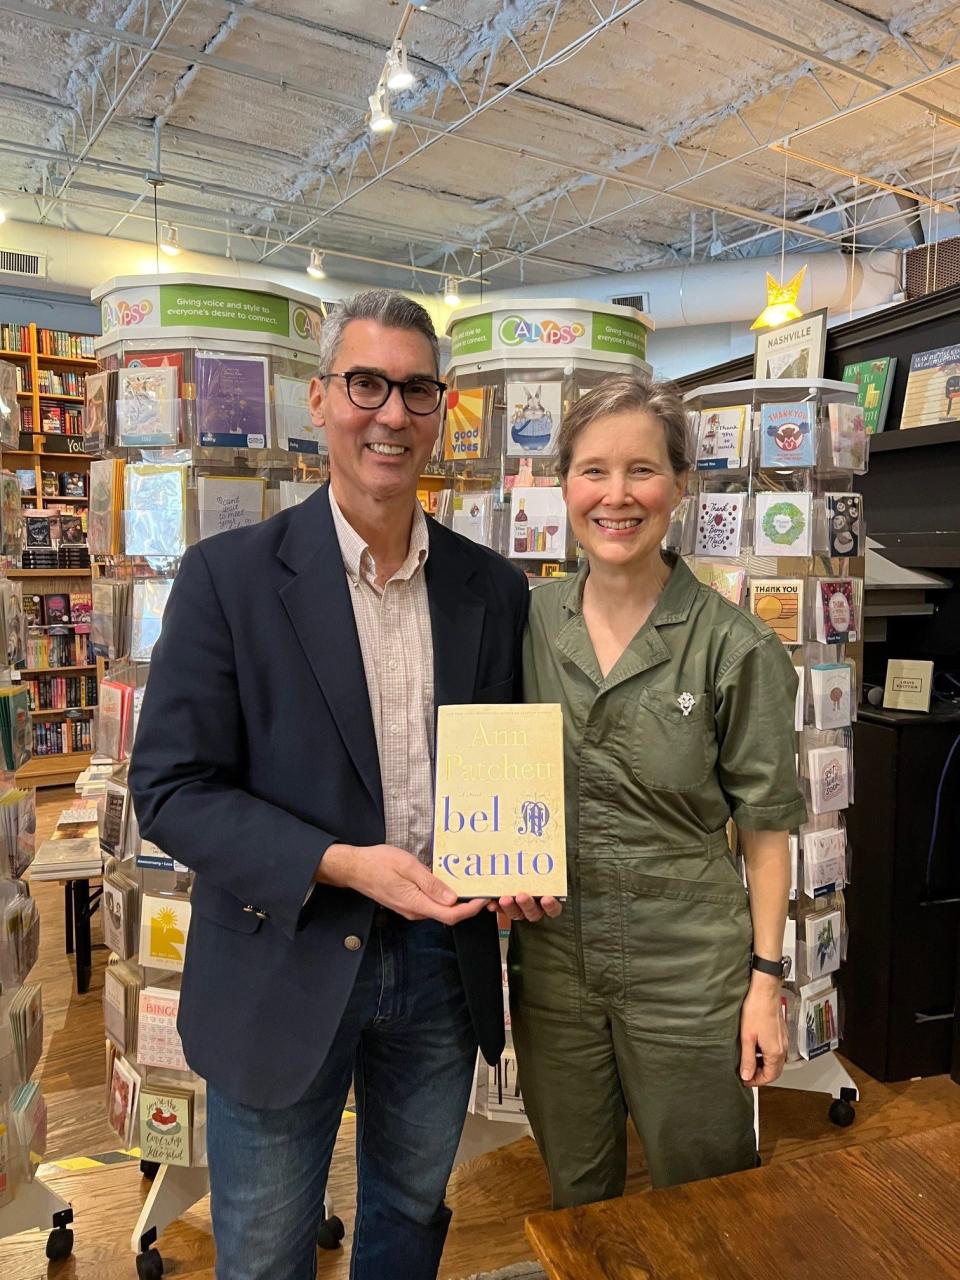 The Tennessean Opinion and Engagement Director David Plazas, left, and Parnassus Books proprietor and novelist Ann Patchett who signed her book "bel canto" for him during her office hours.